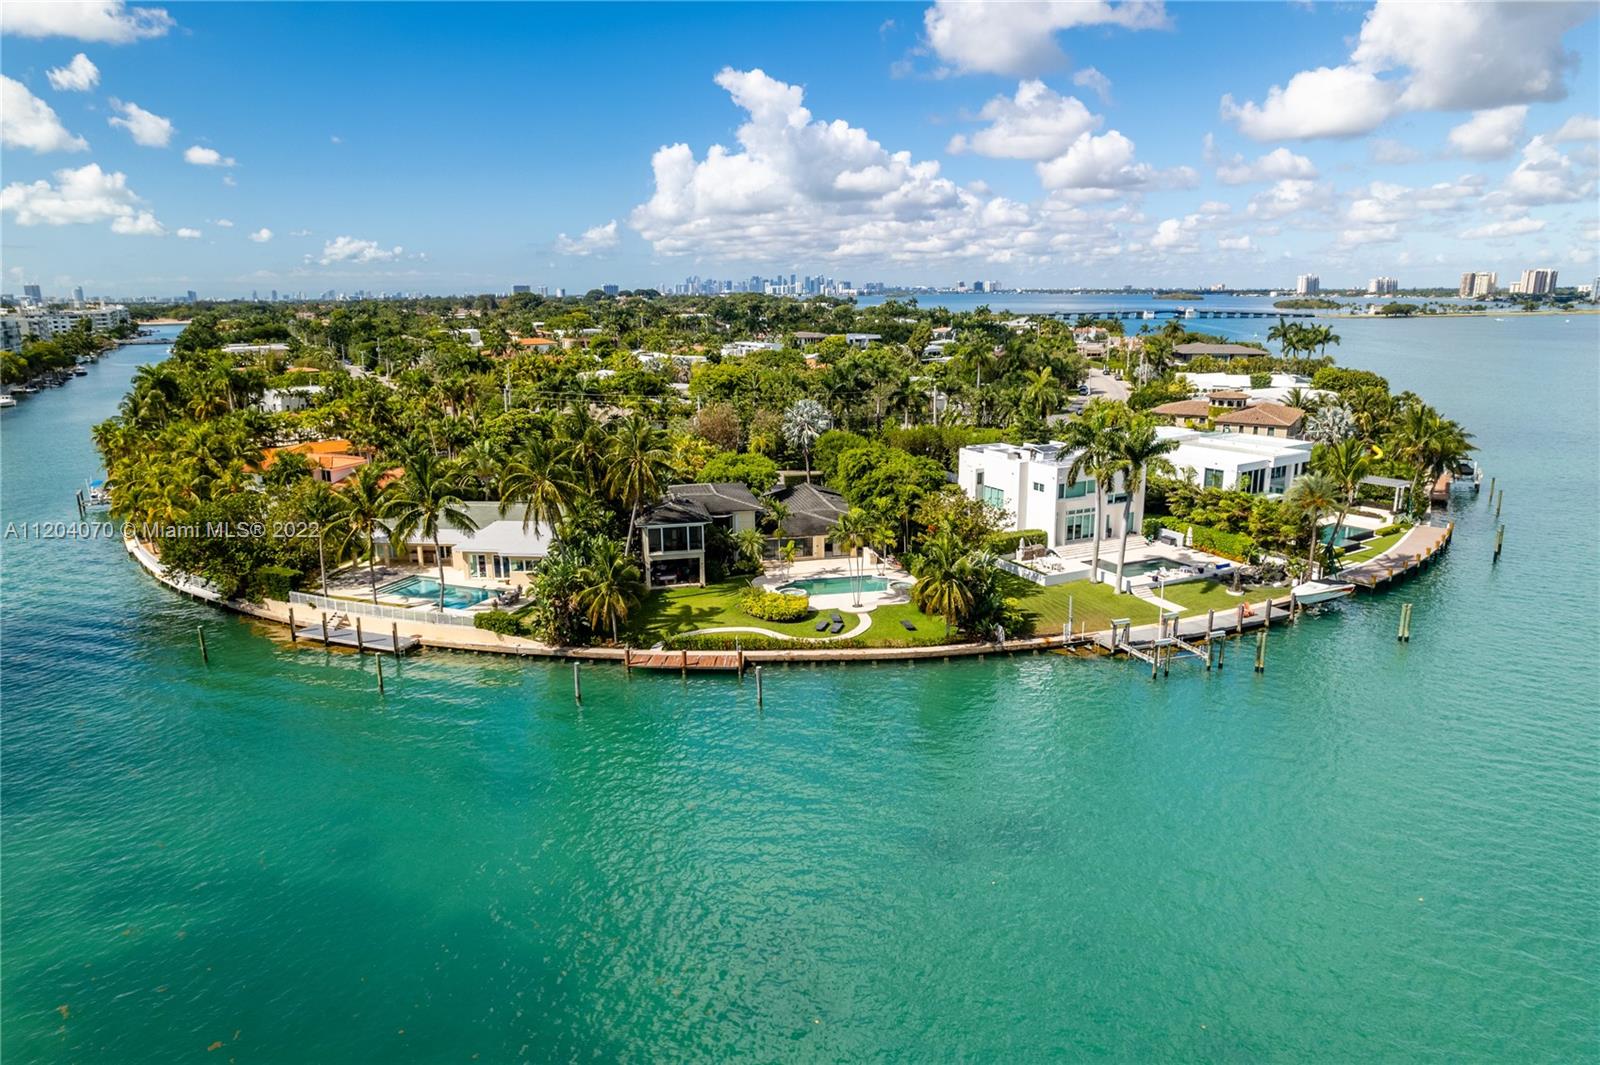 This extraordinary estate sits on a 20,691 square-foot pie-shaped lot. It has the most expansive open bay views in Bay Harbor and boasts 120 linear feet of breathtaking waterfrontage that overlooks Biscayne Bay and the Sunny Isles skyline. One of the largest lots in Bay Harbor, this home’s floor to ceiling windows offer beautiful natural light all day as a result of its northern exposure. Renovate this home to perfection or build your dream home in Bay Harbor.